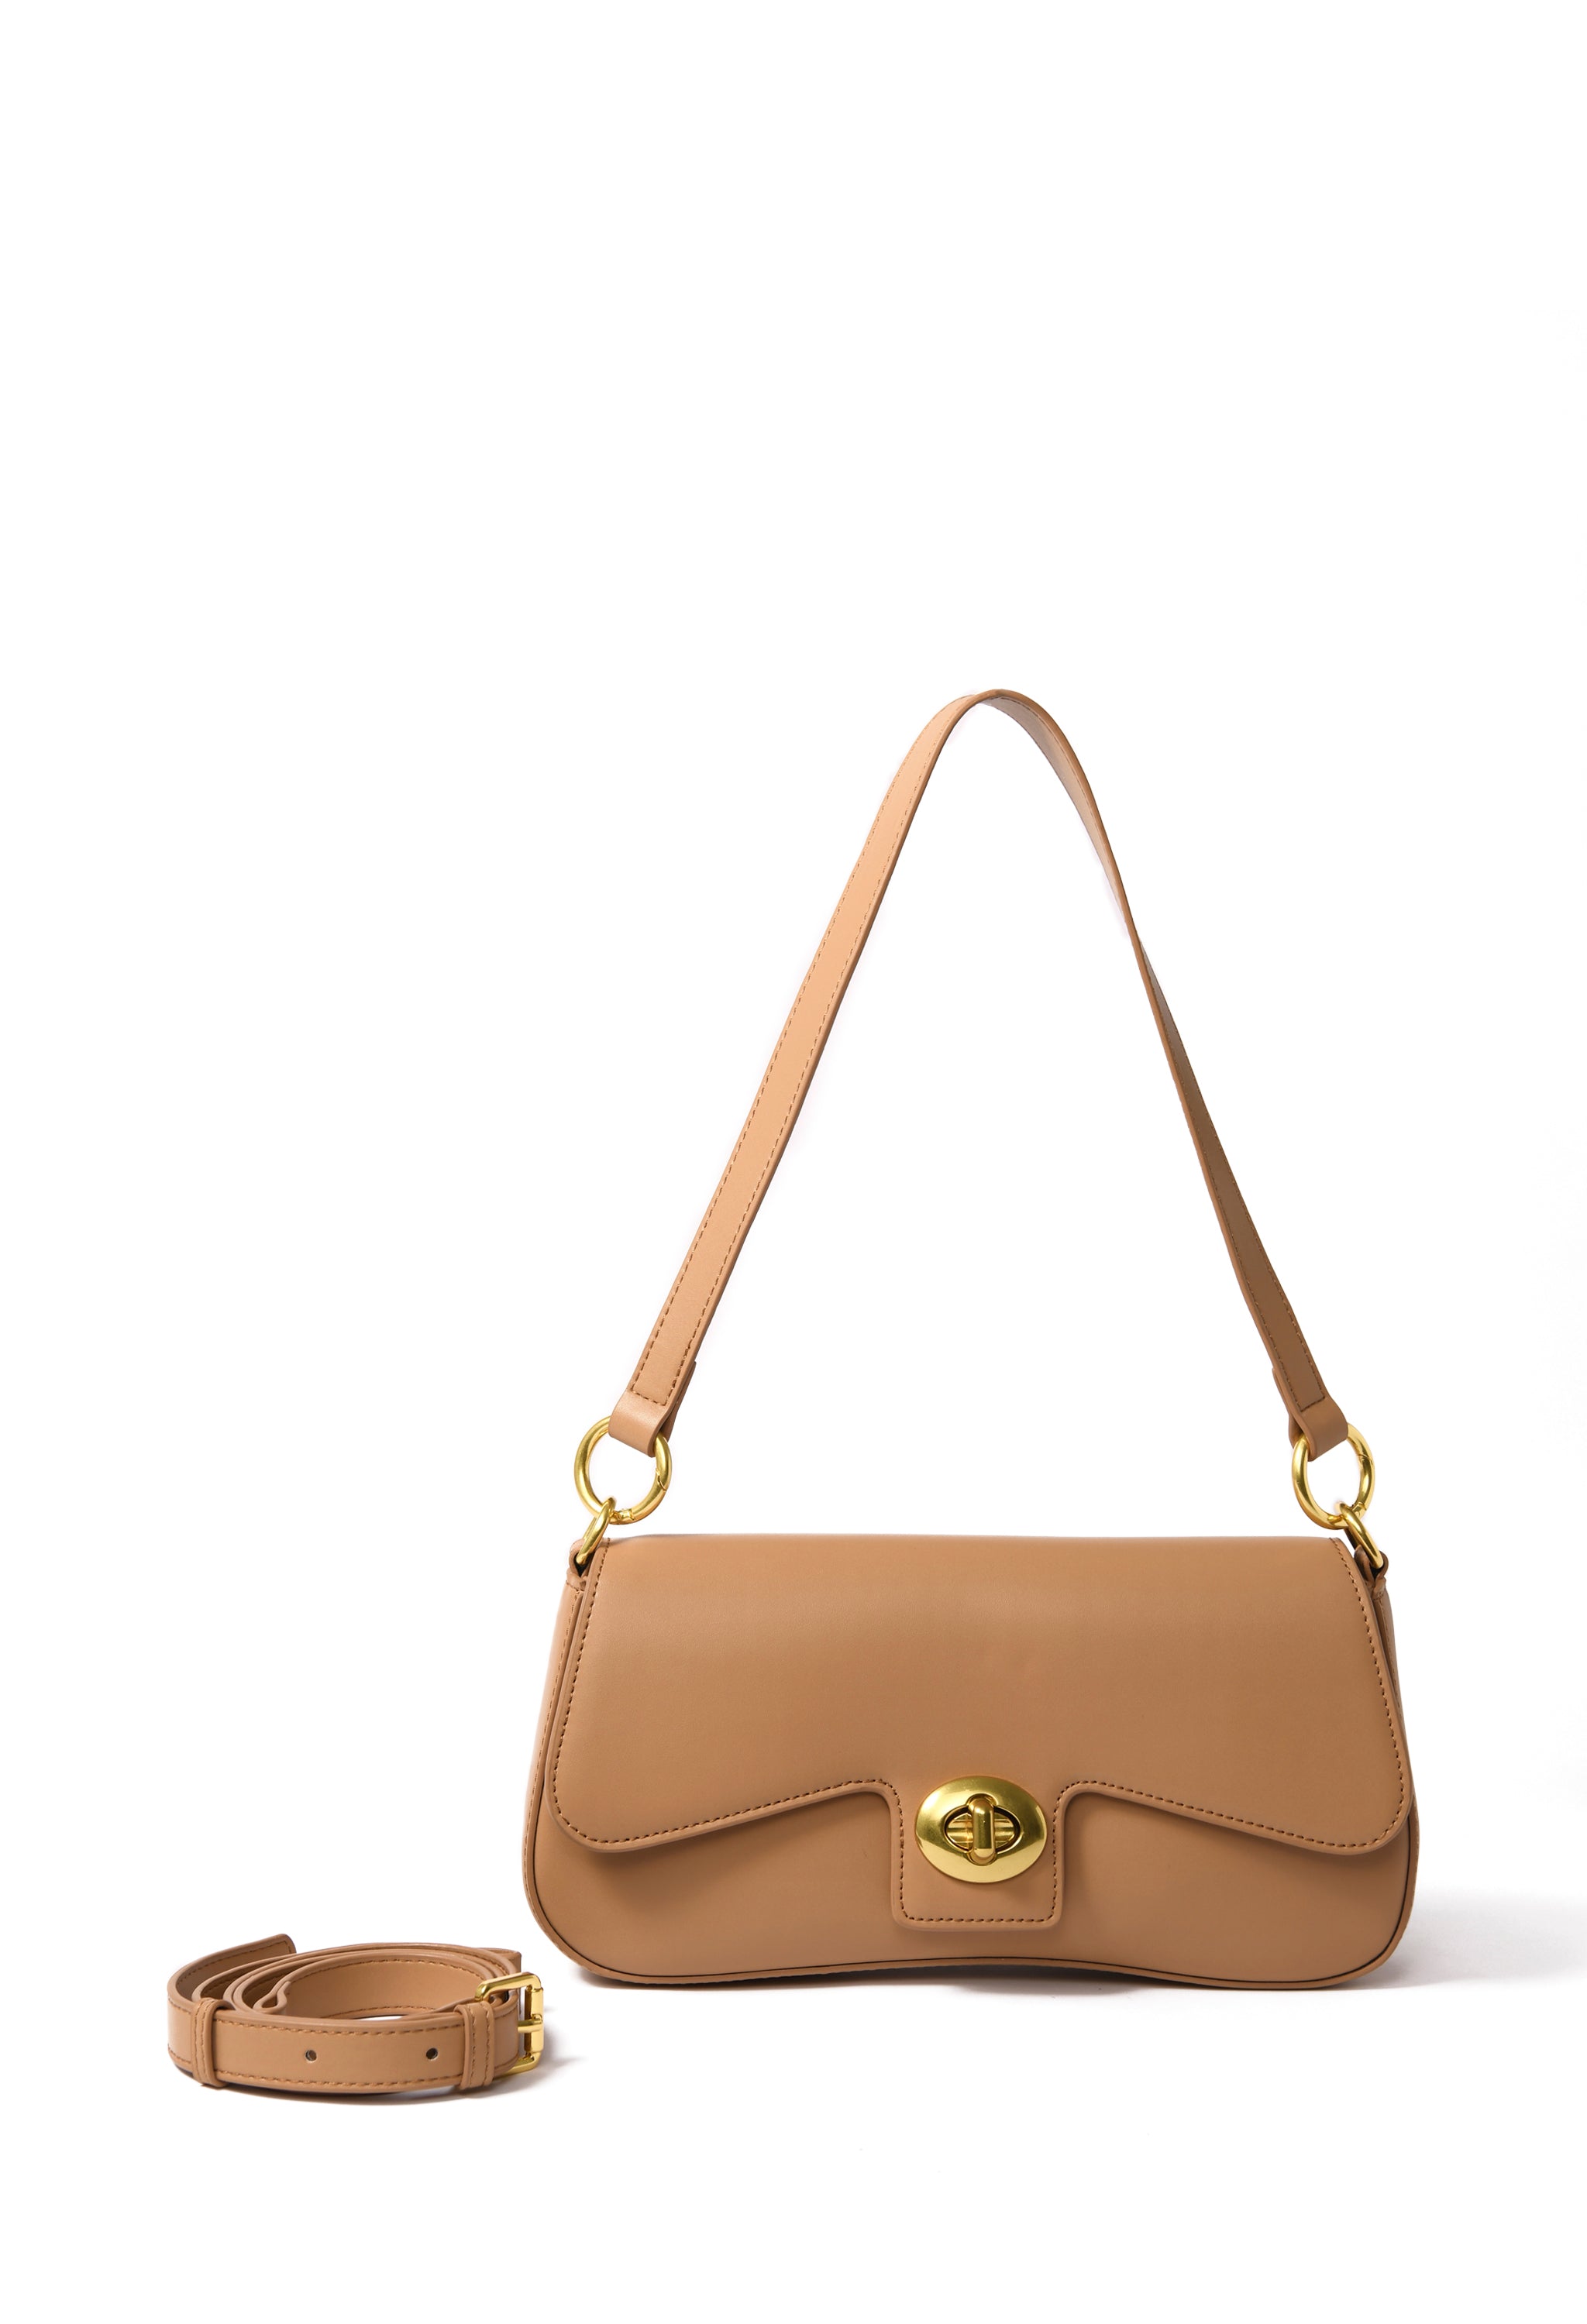 Jacqueline Bag in smooth leather, Apricot